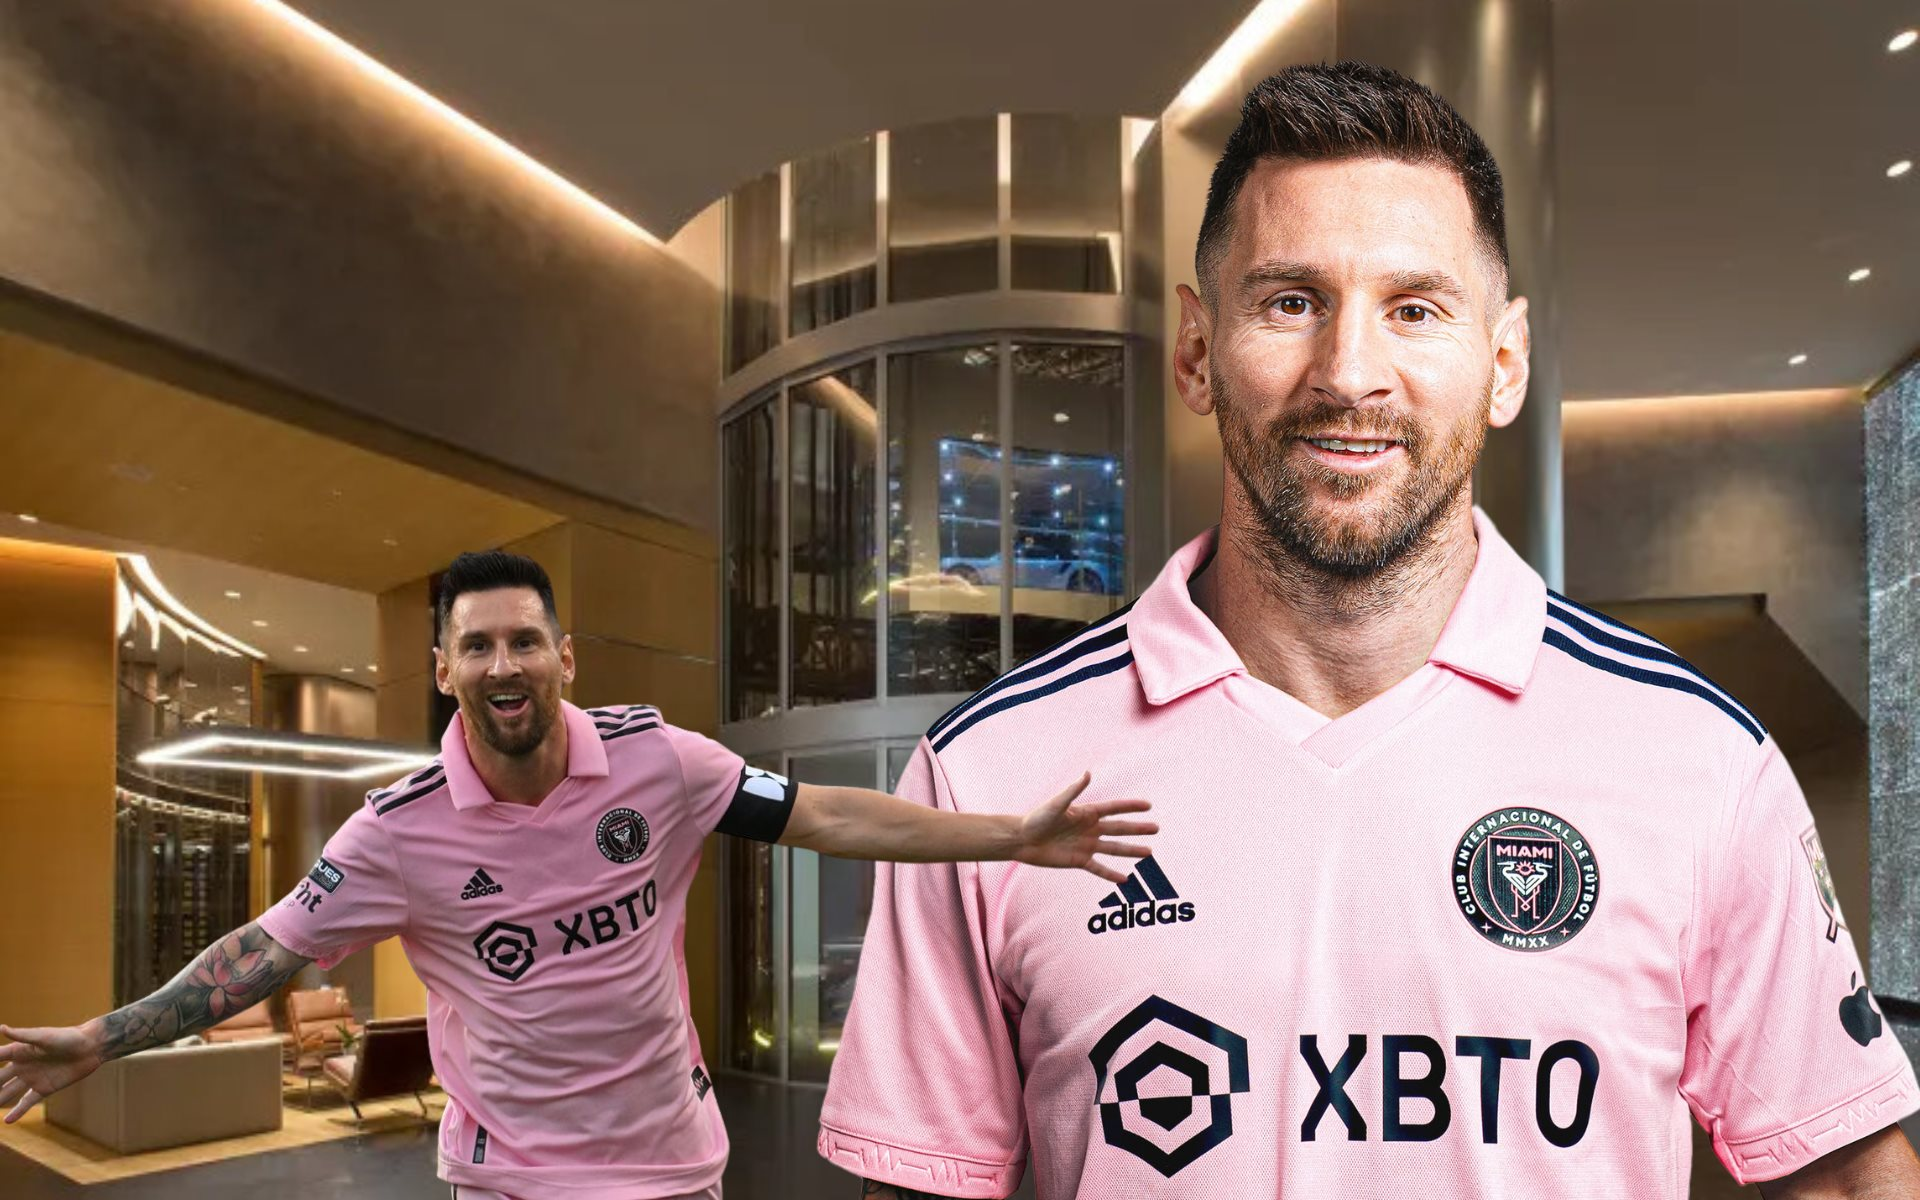 Rejecting a billion-dollar invitation, Messi still has a high-class life in America: Living in a tower designed by Porsche, partying with the Beckham family - Photo 1.